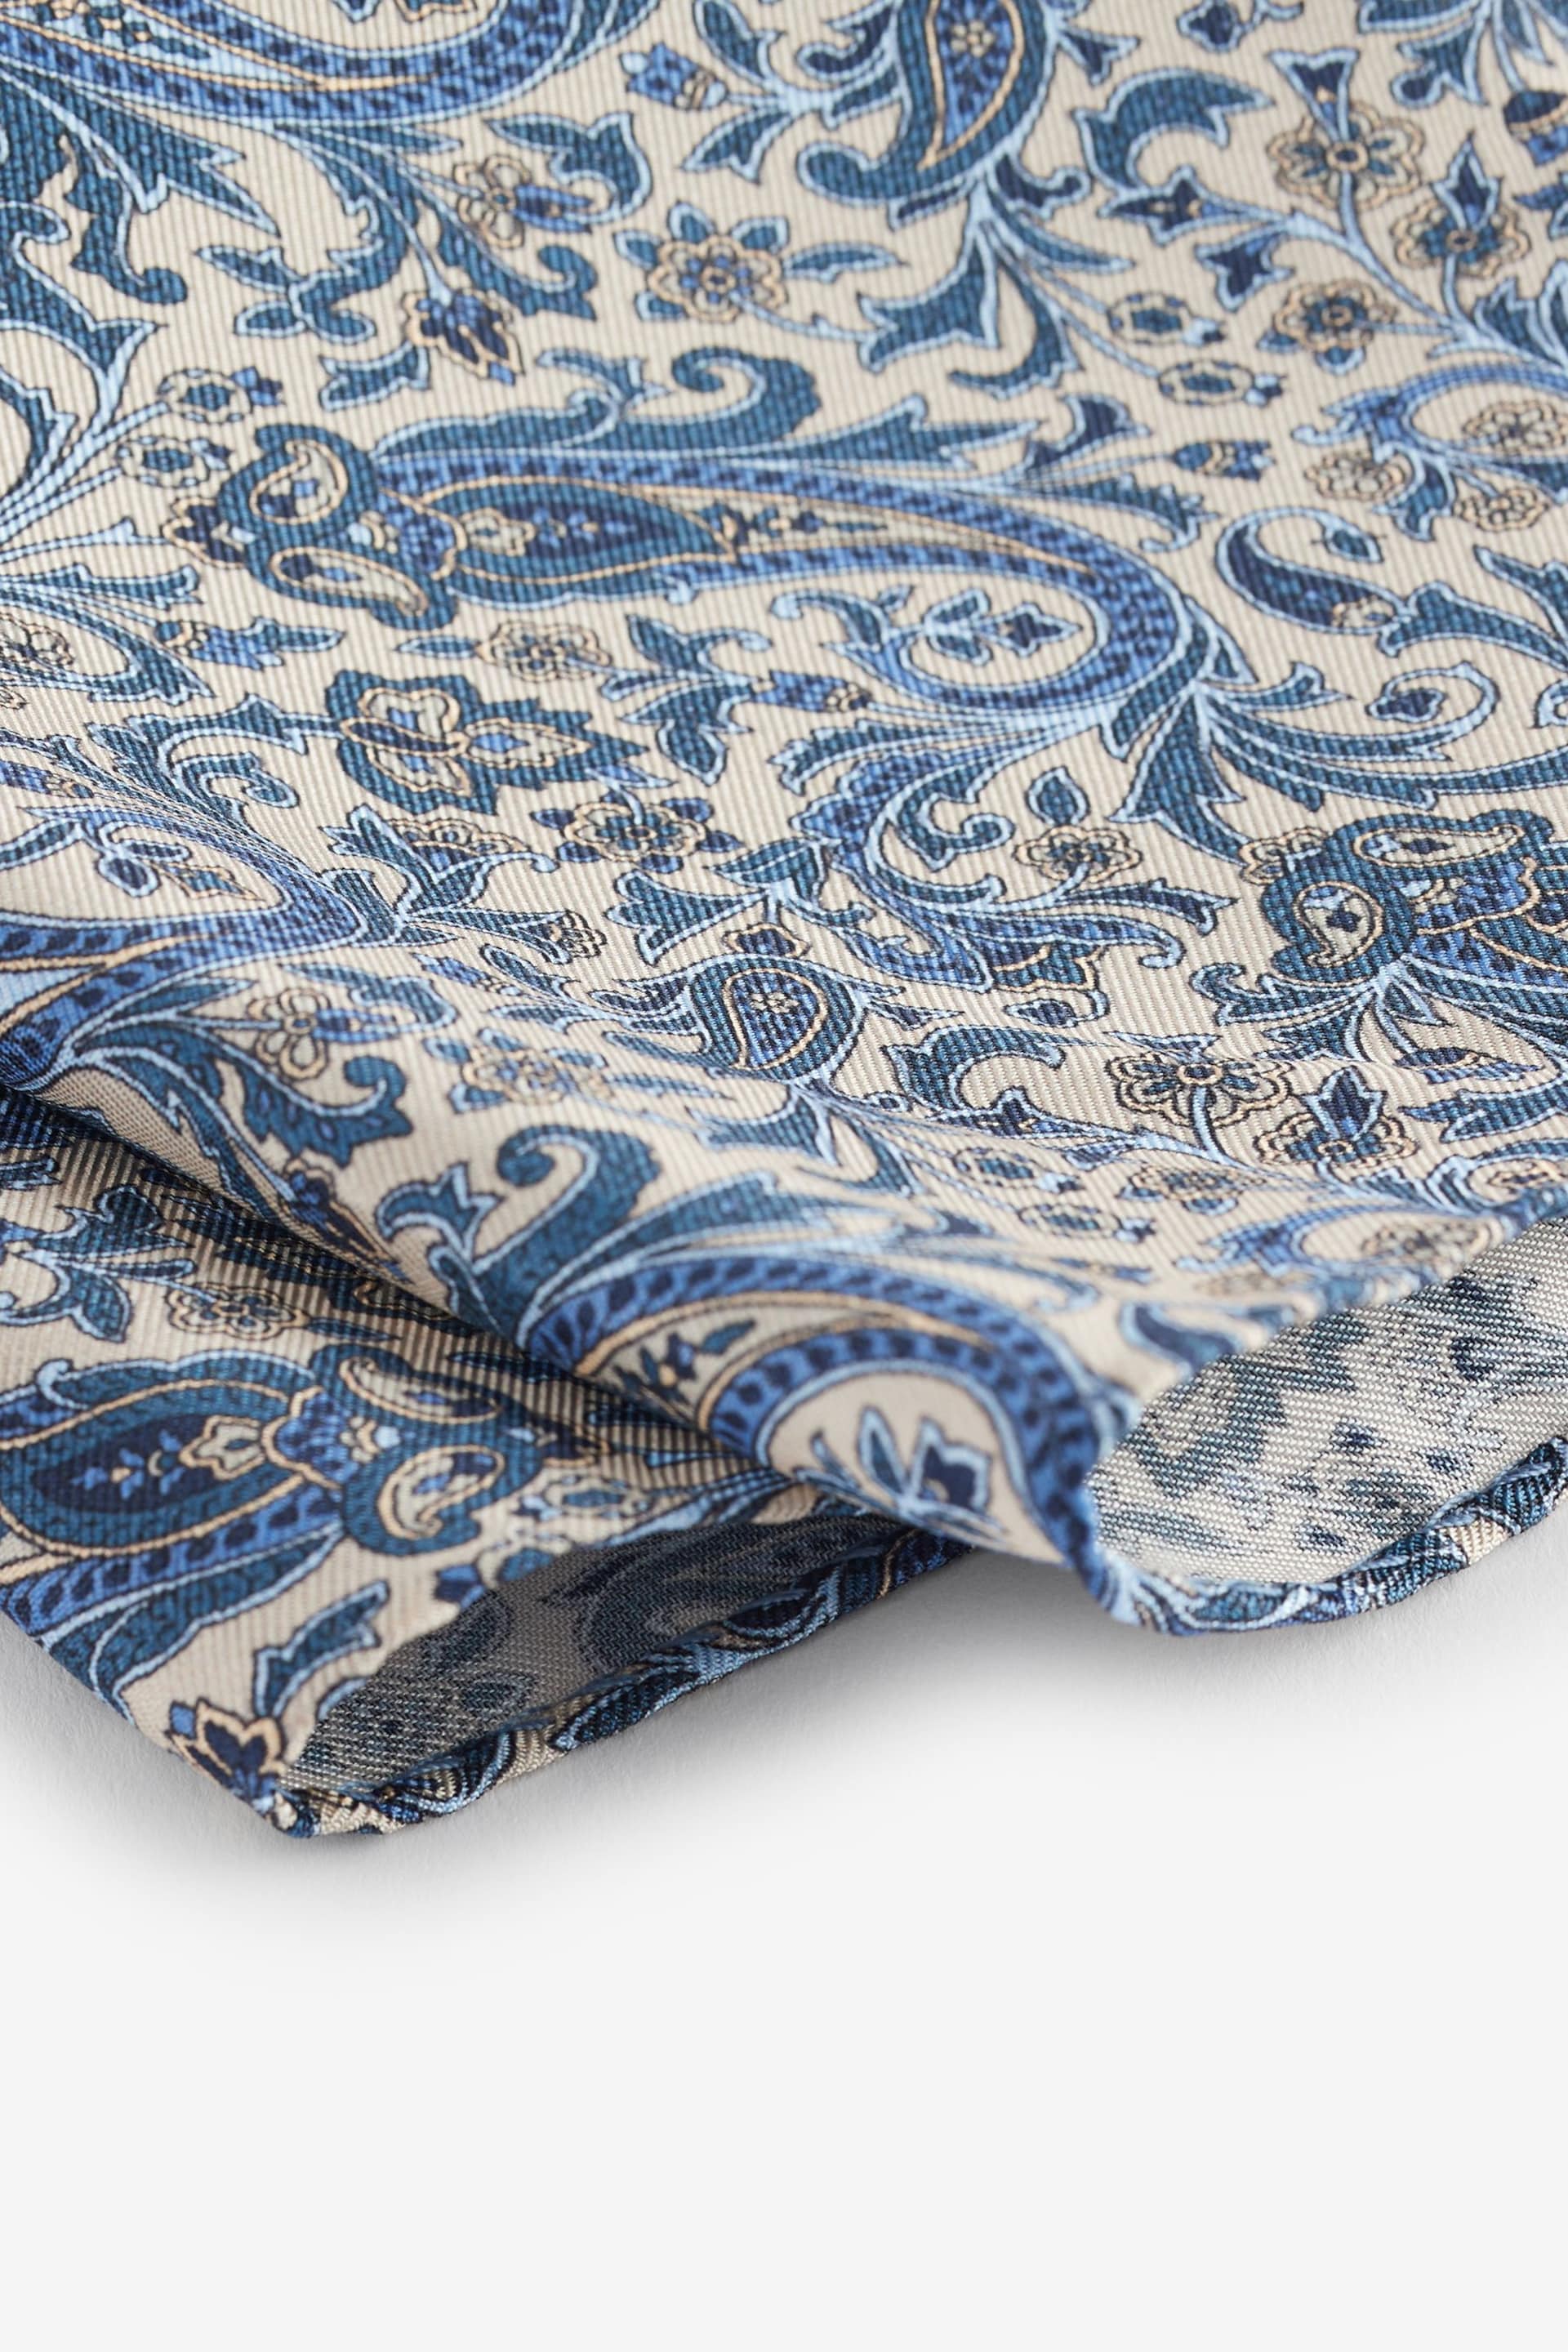 Light Blue/Blue Paisley Signature Made In Italy Tie And Pocket Square Set - Image 5 of 5